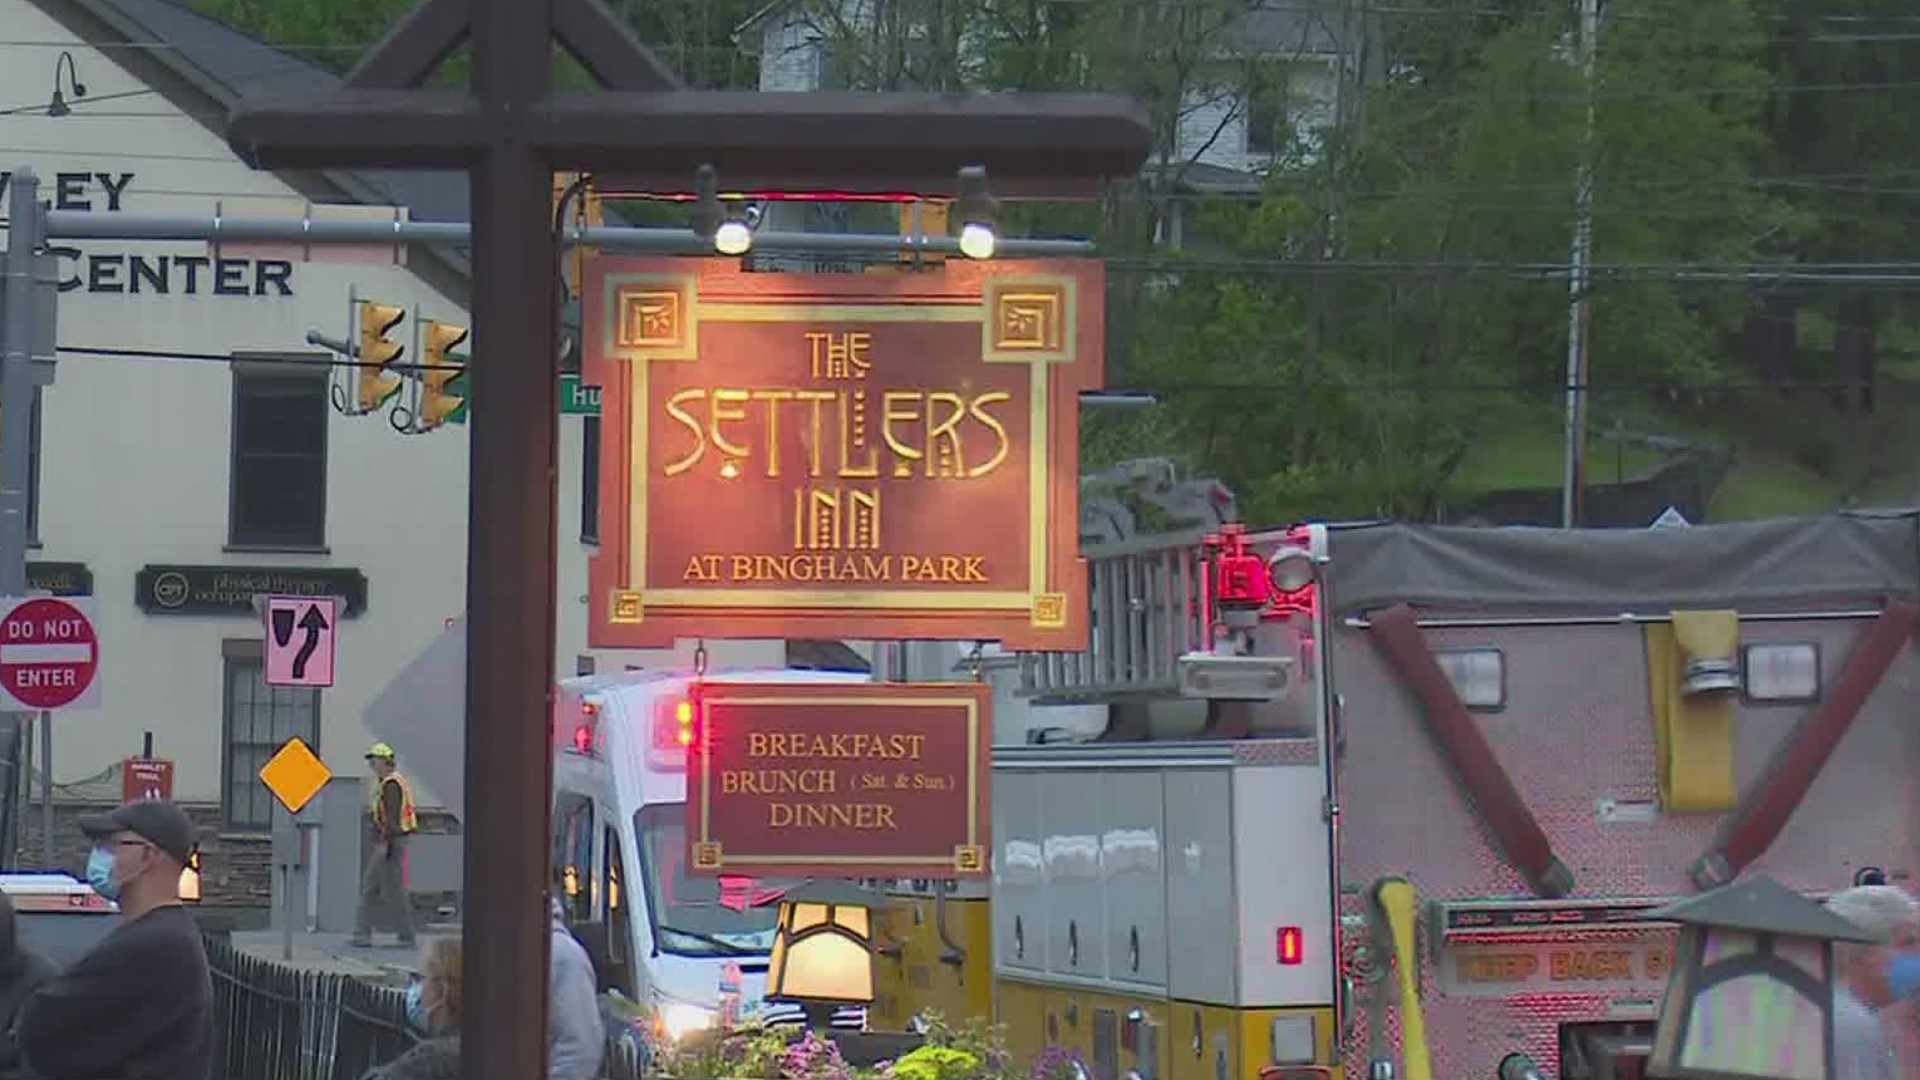 An electrical malfunction is to blame for an early morning fire at an Inn in Wayne County.